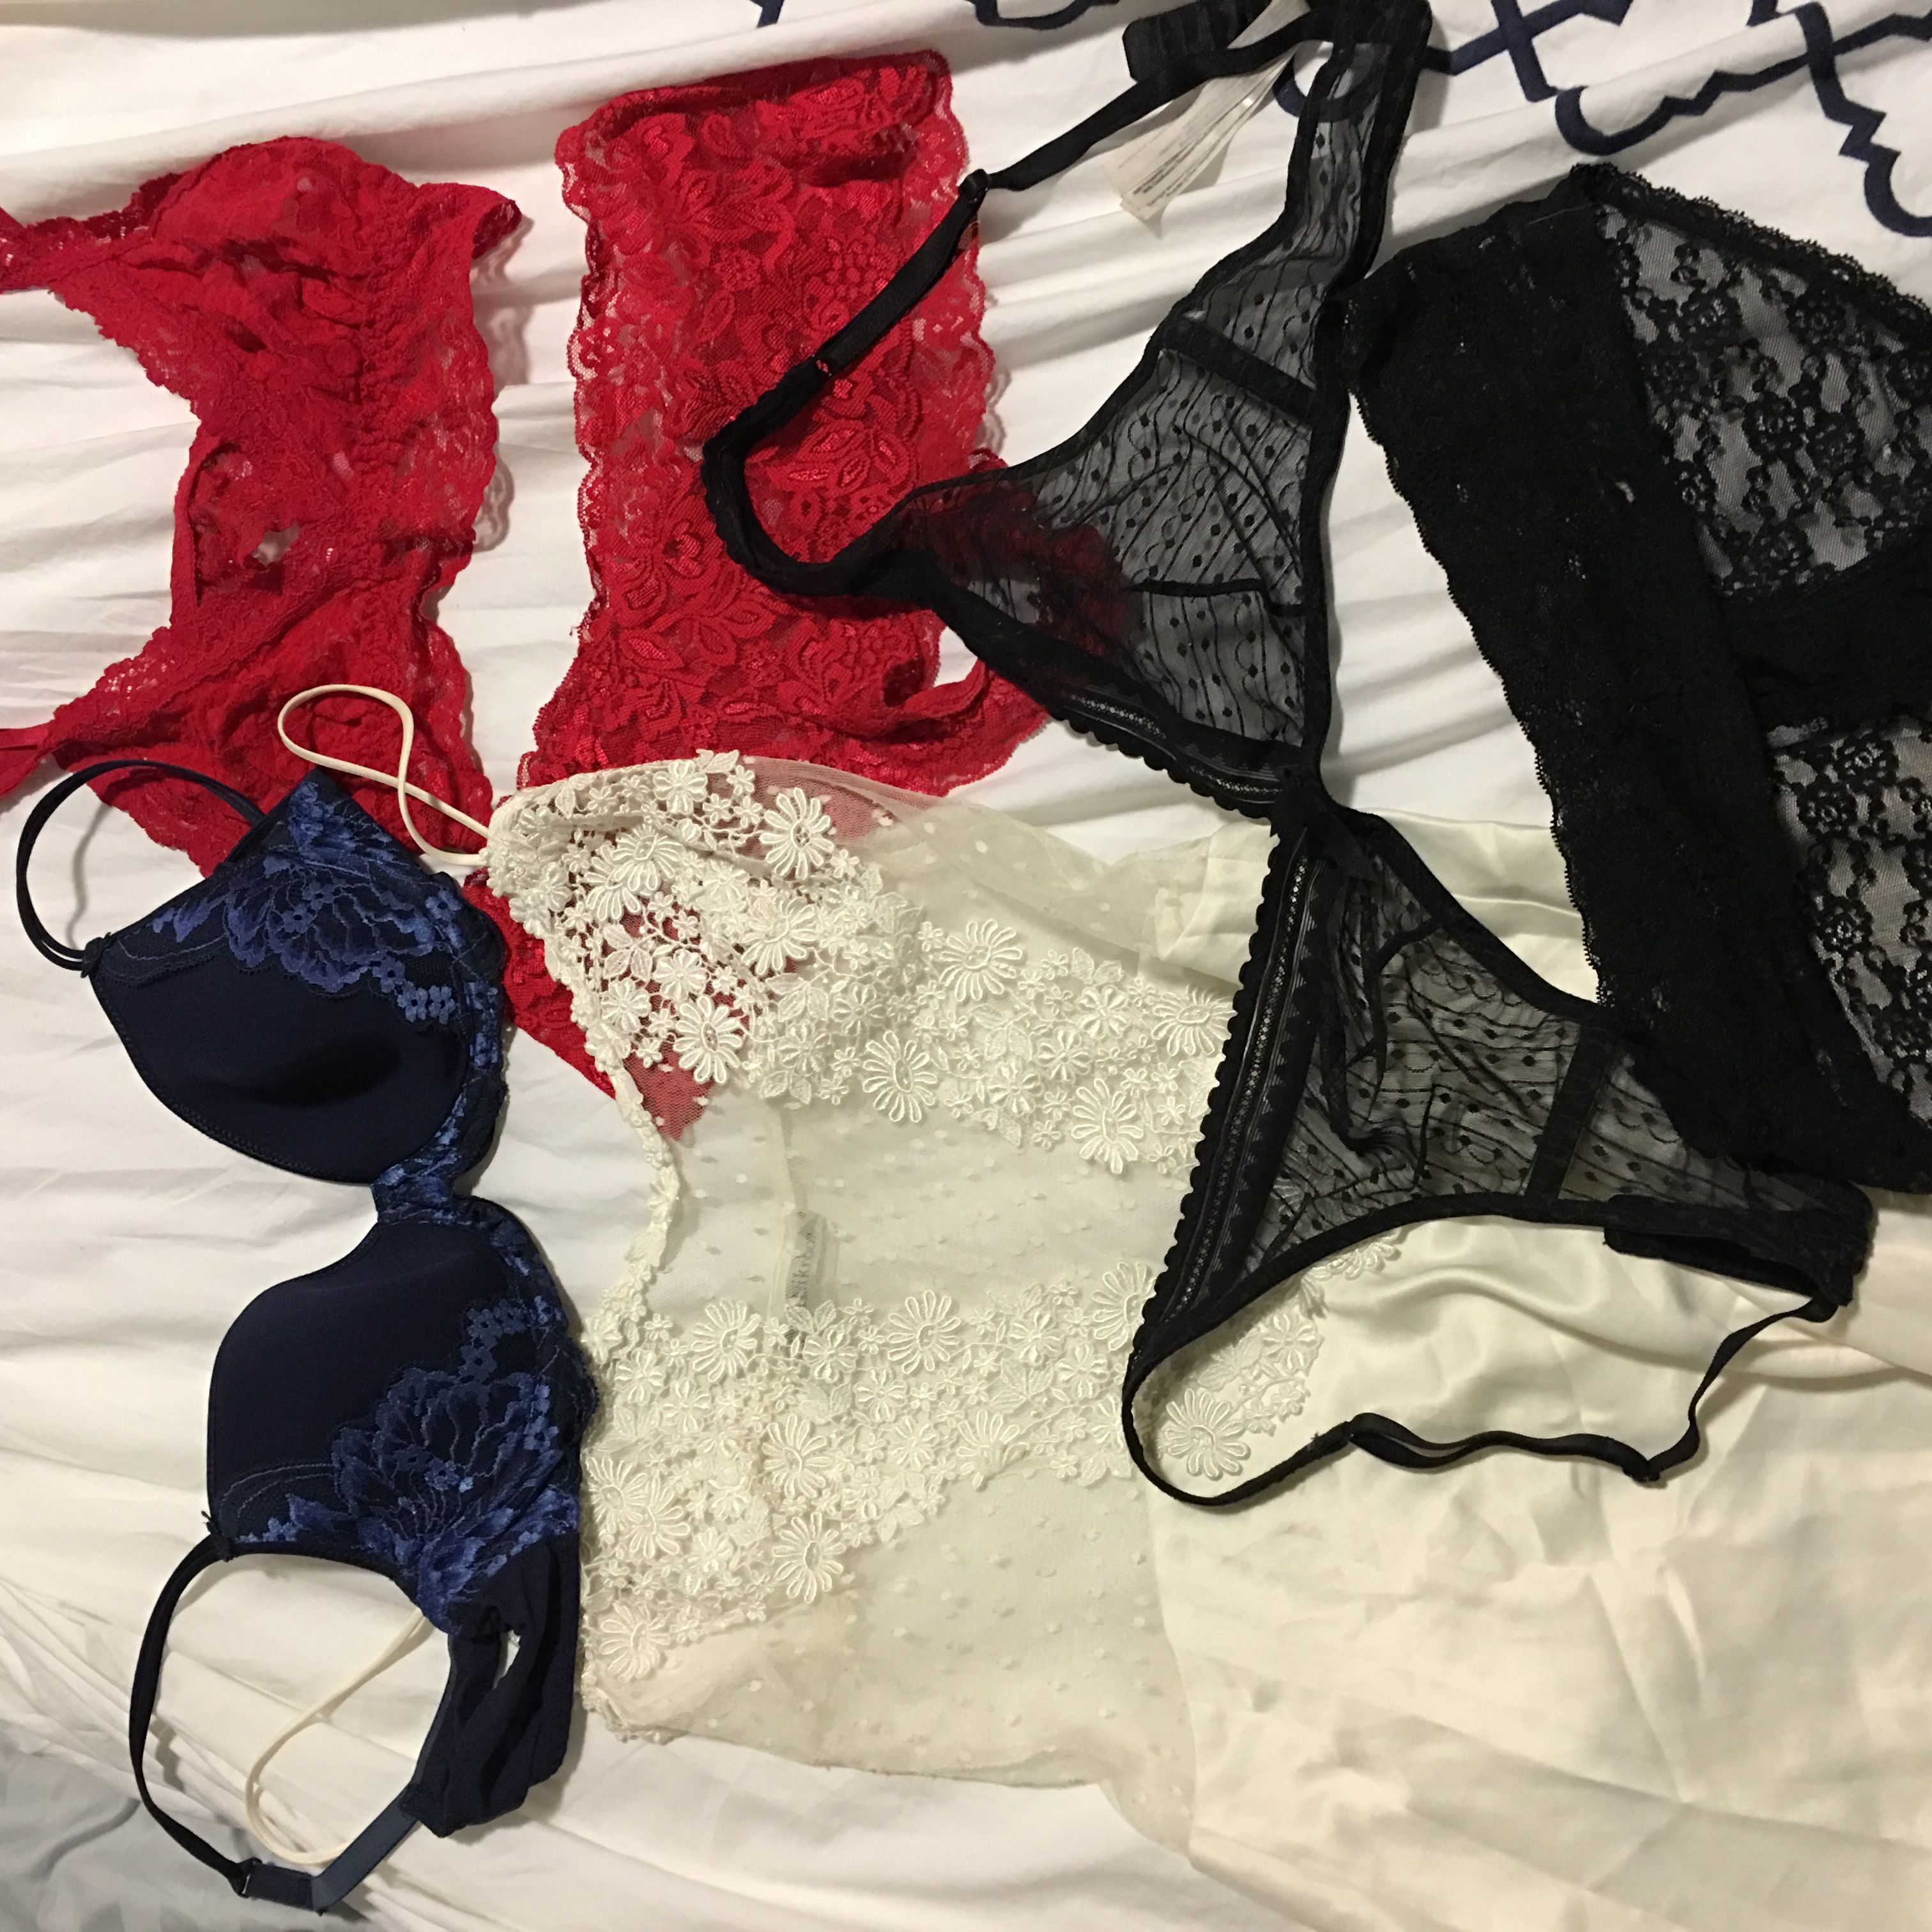 Why I Began My New Marriage With a Trip to a French Lingerie Store picture